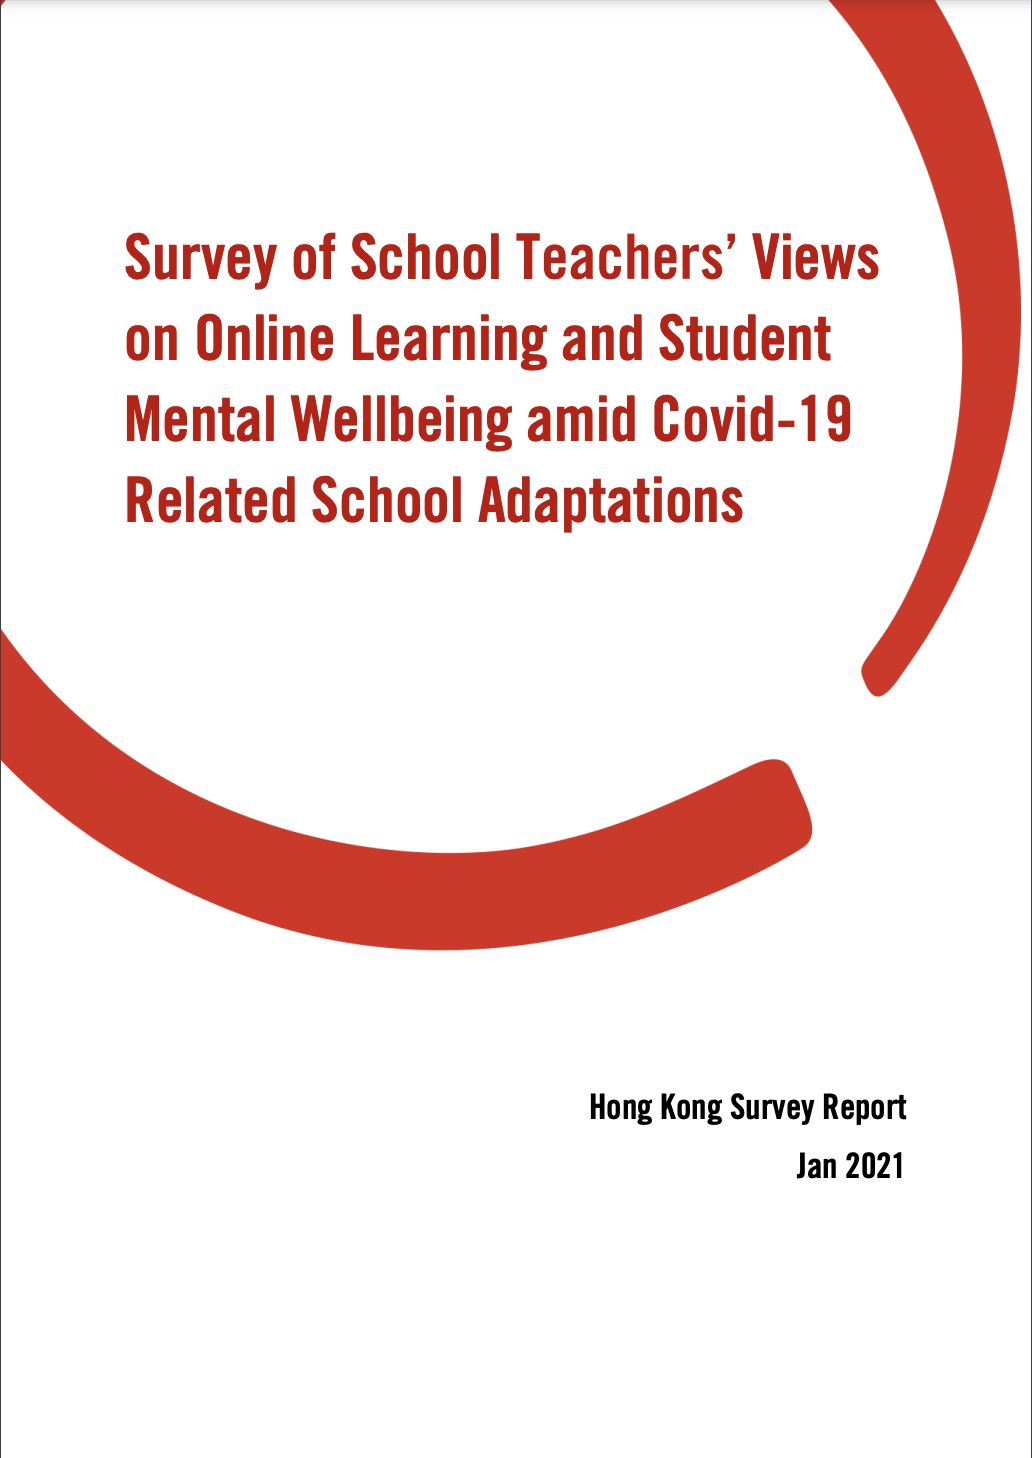 Survey of School Teachers’ Views on Online Learning and Student Mental Wellbeing amid Covid-19 Related School Adaptations（只提供英文版）